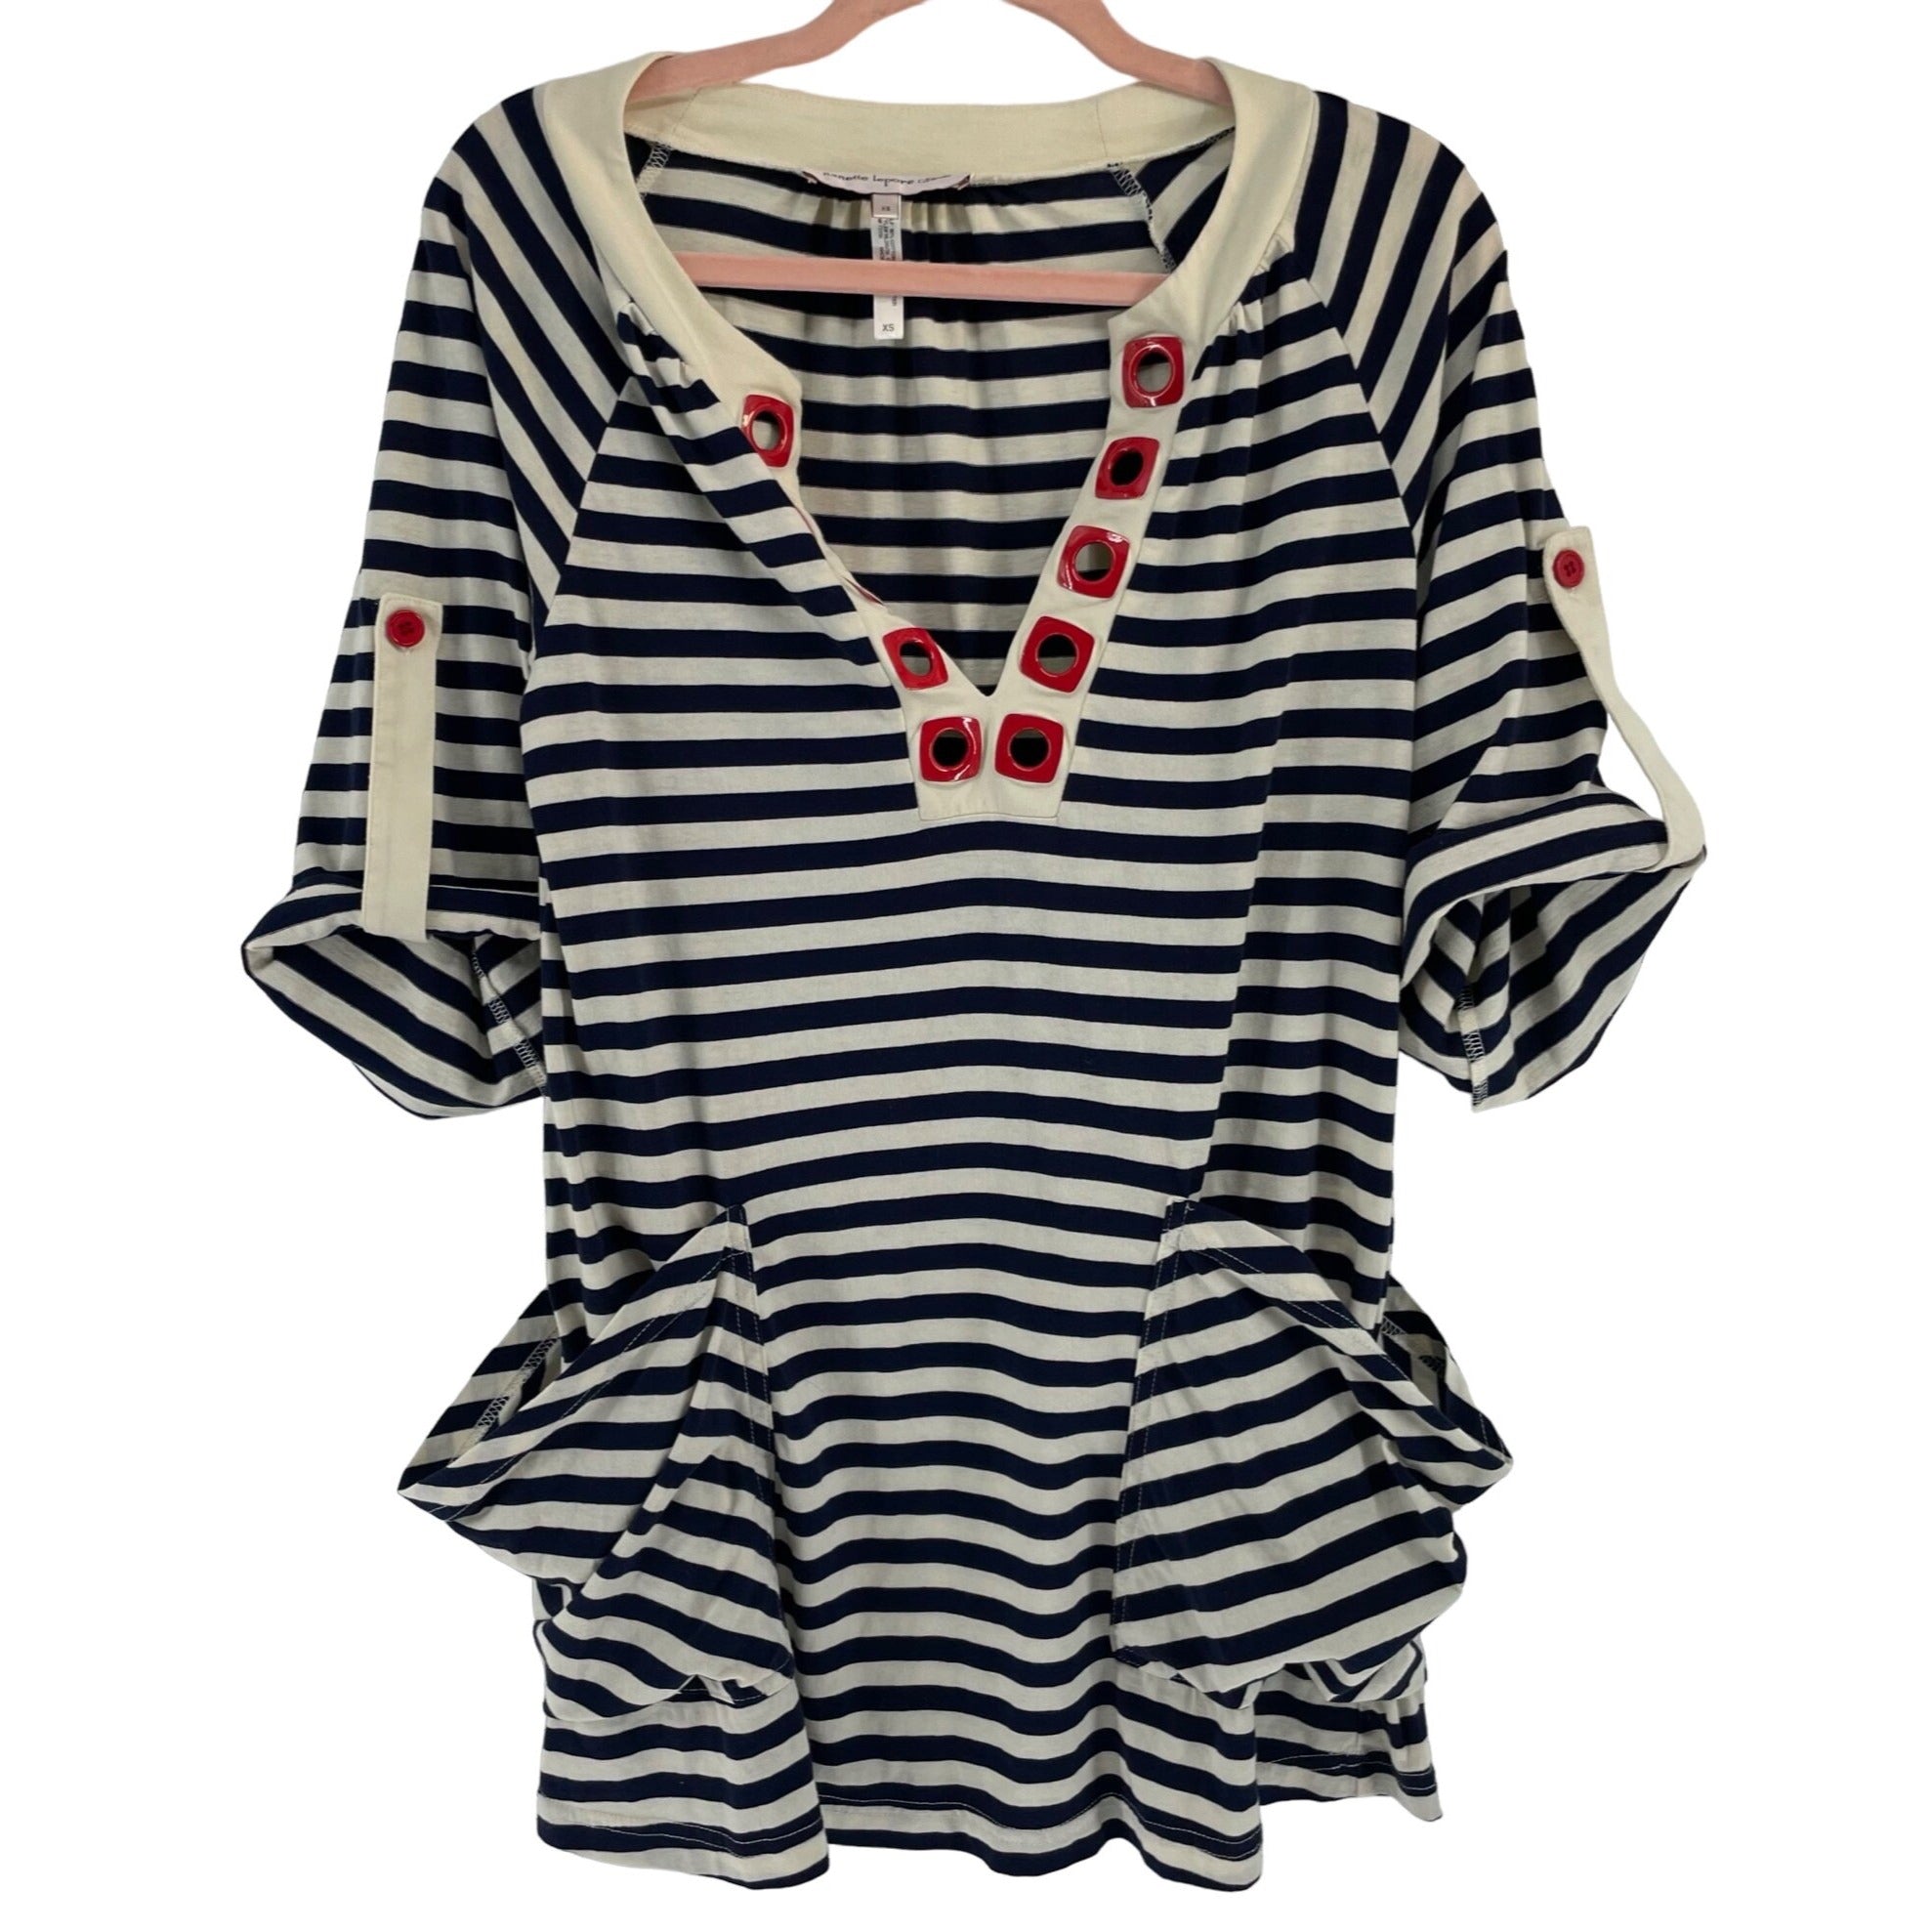 Nanette Lepore Women's Size XS Navy/Cream/Red Striped Beach Cover-Up W/ Pockets